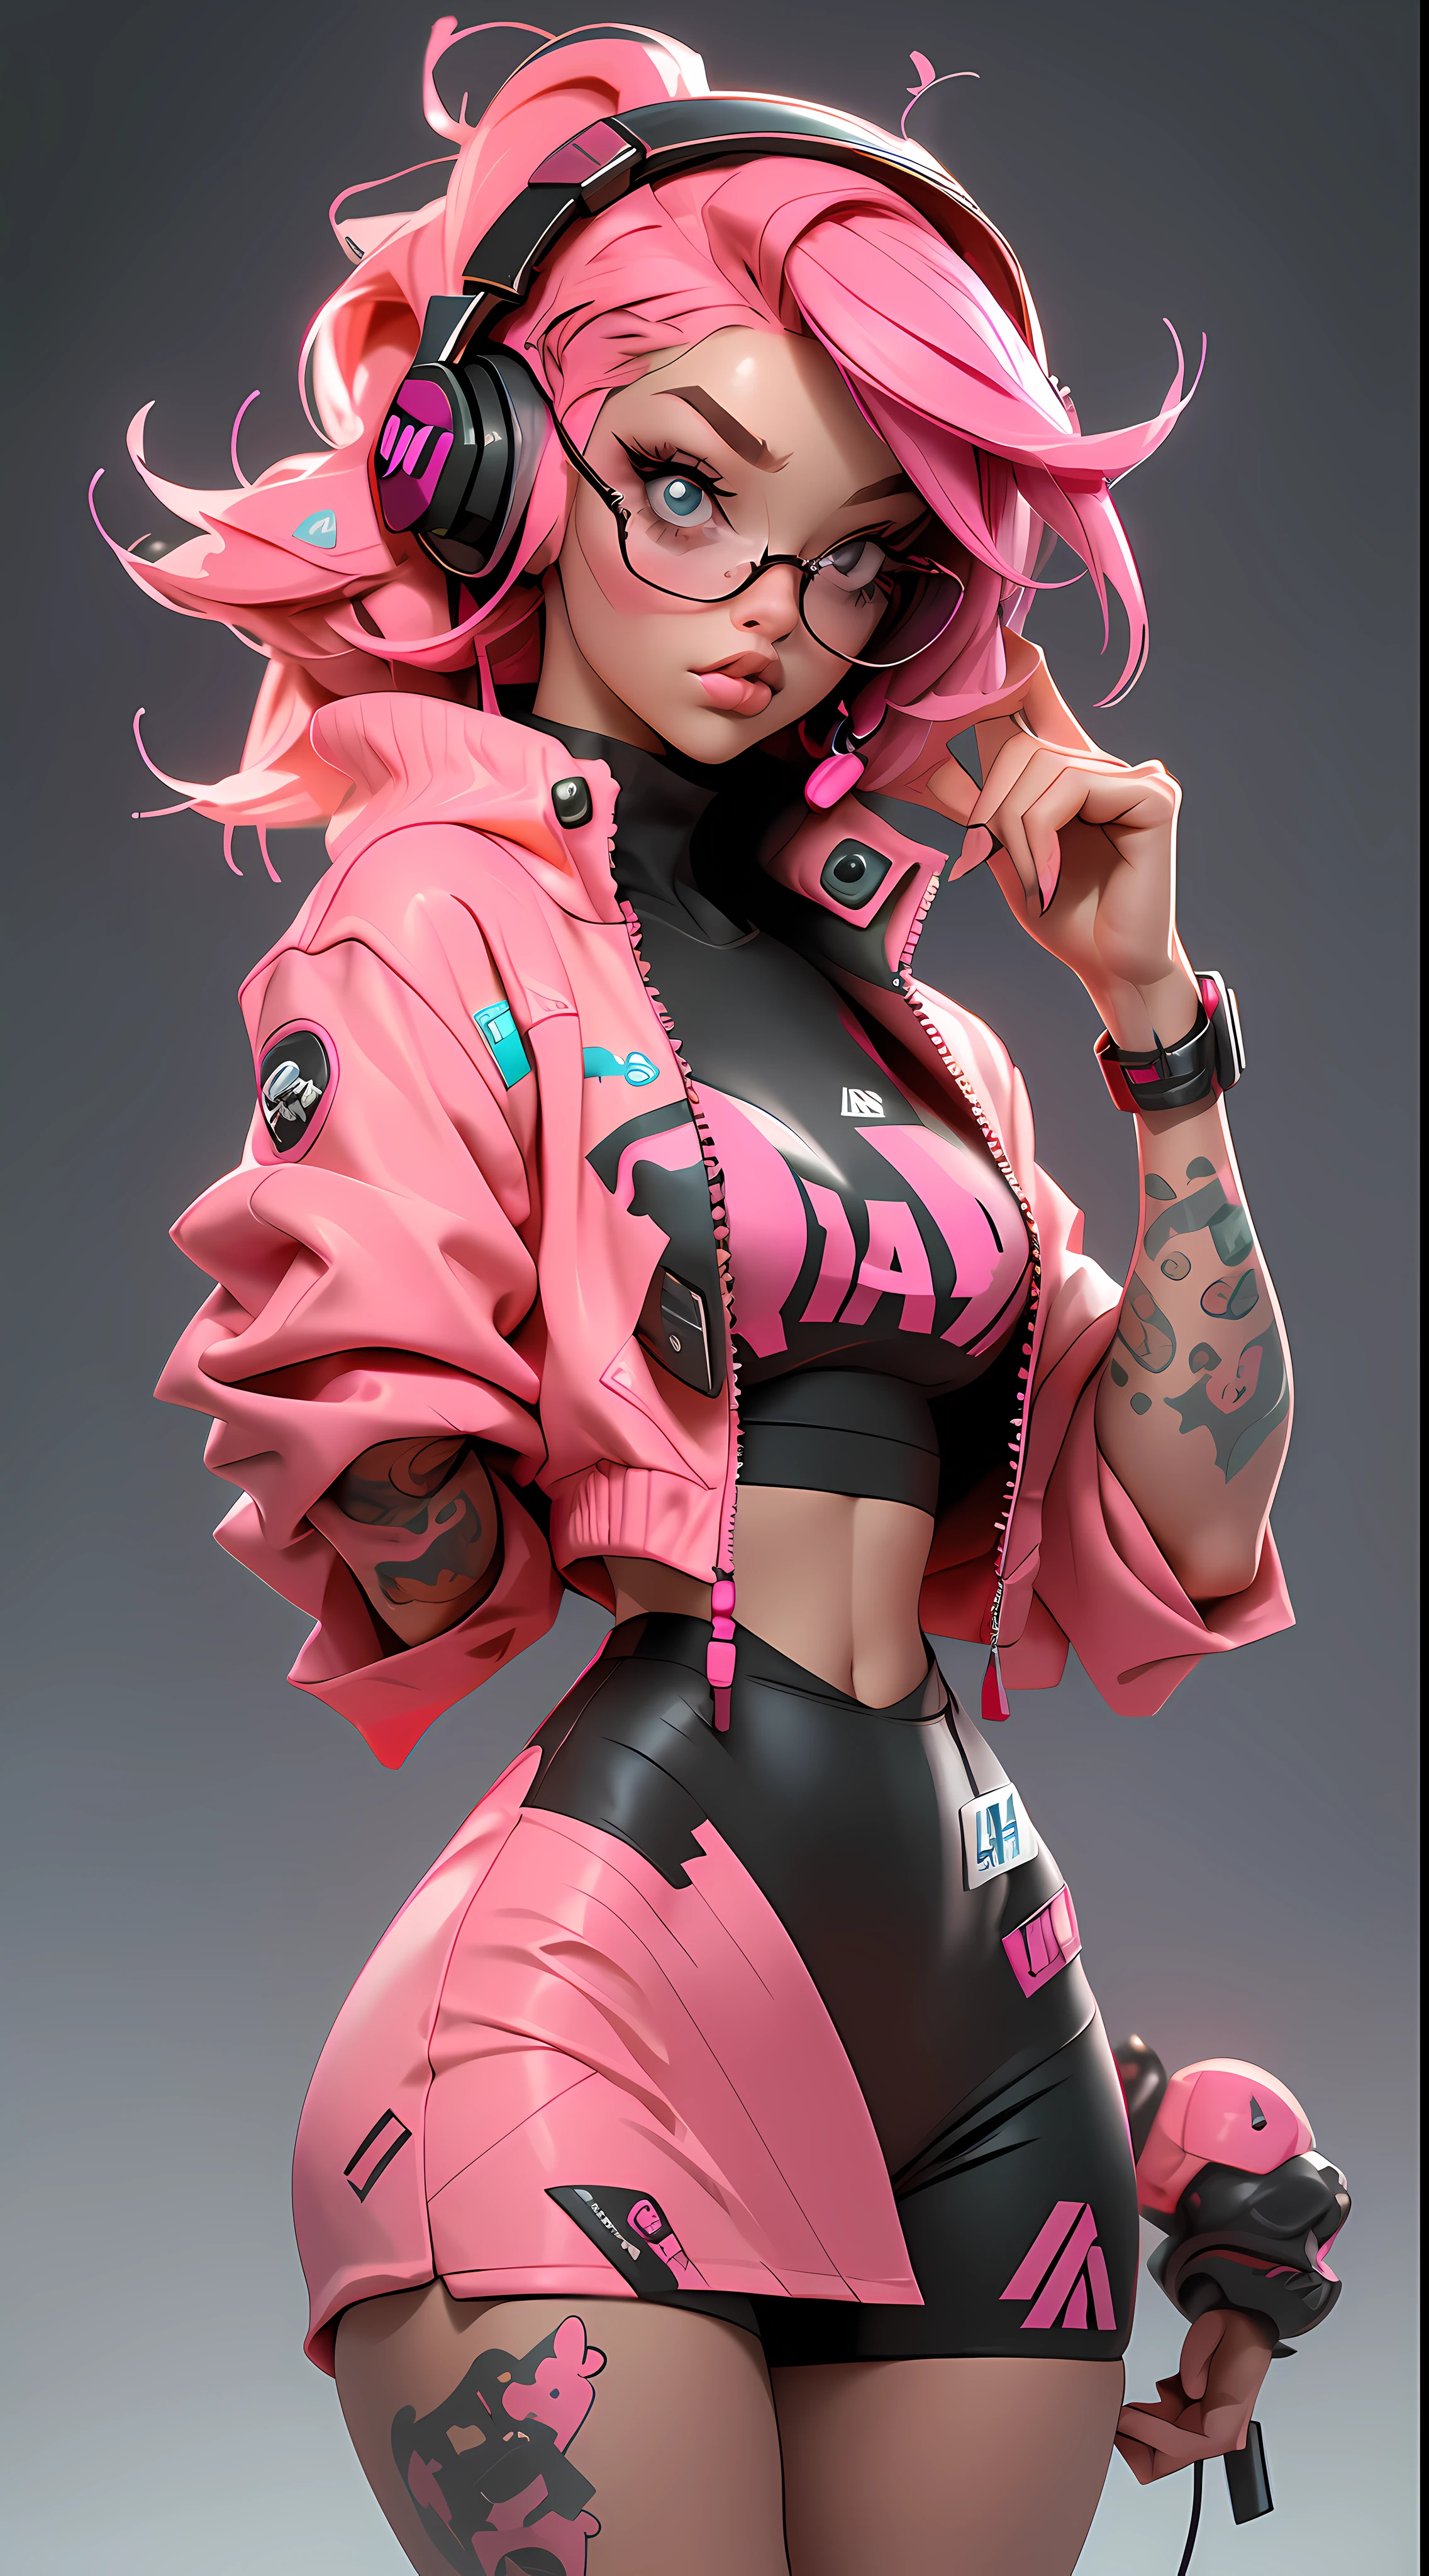 ((Best quality)), ((masterpiece)), ((realistic)) and ultra-detailed photography of a 1nerdy girl with neon headphones. She has ((pink hair)), is wearing an orange techwear jacket, and exudes a ((beautiful and aesthetic)) vibe.